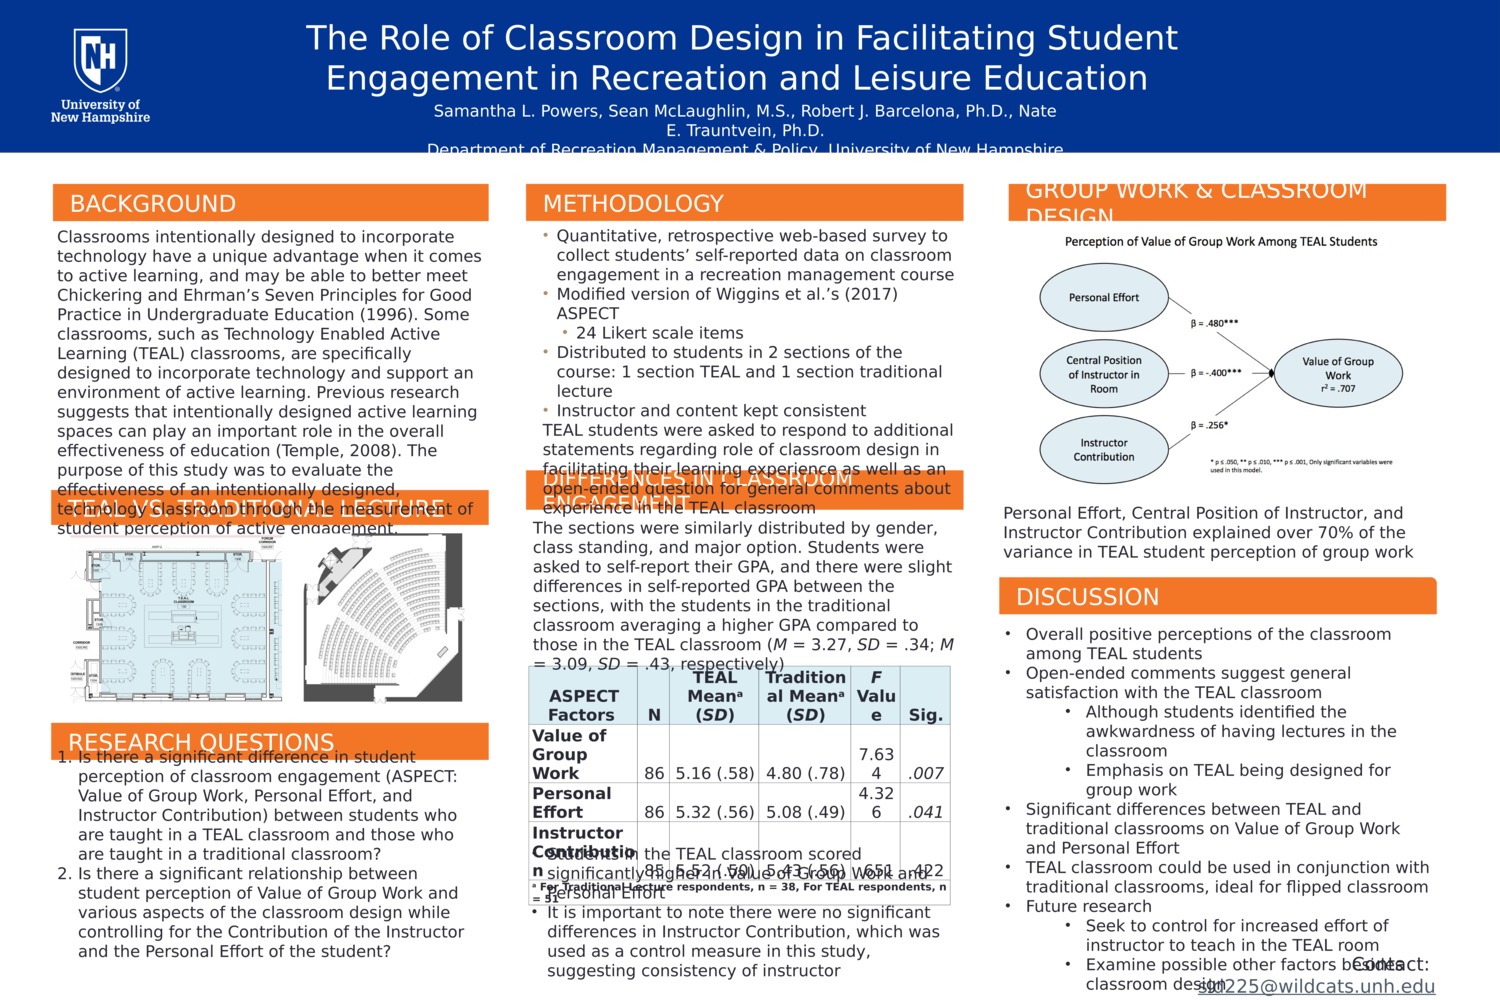 The Role Of Classroom Design In Facilitating Student Engagement In Recreation And Leisure Education  by sld225